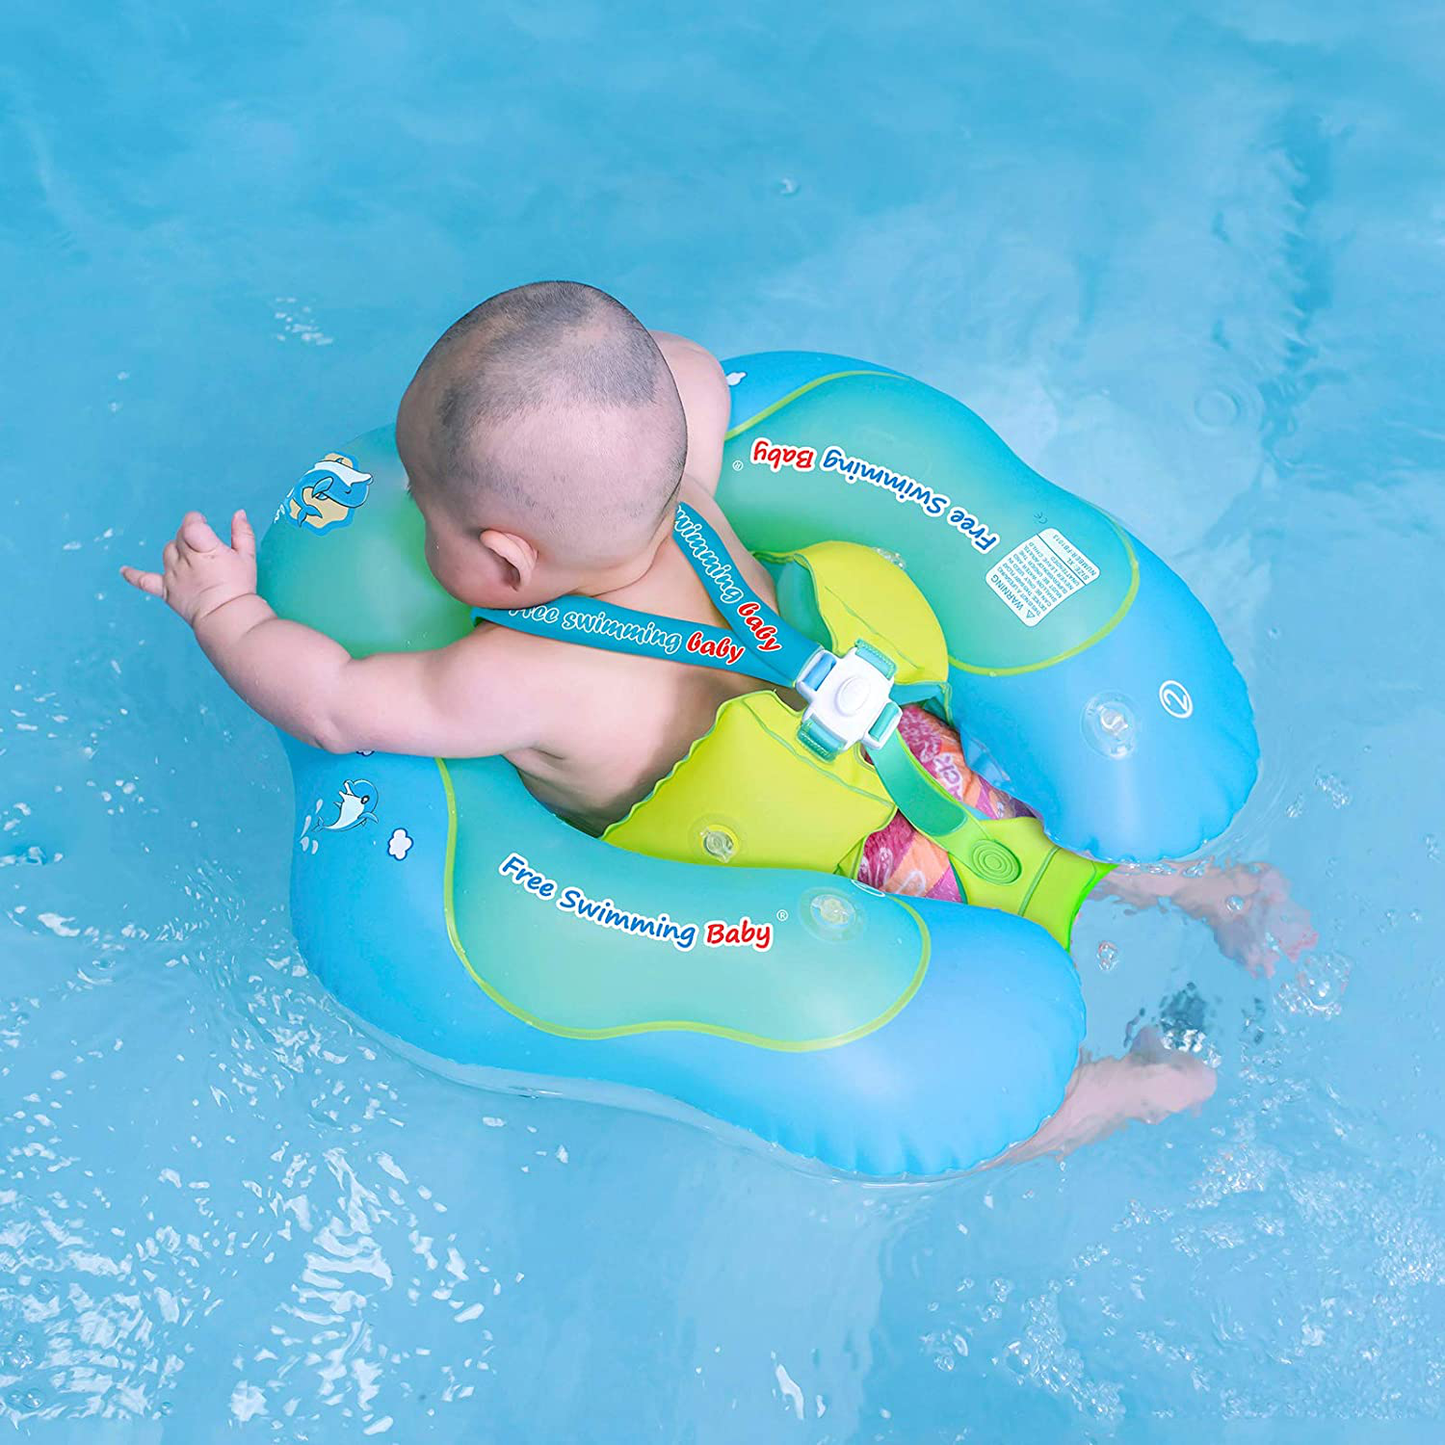 Free Swimming Baby Inflatable Baby Swim Float Children Waist Ring Inflatable Pool Floats Toys Swimming Pool Accessories for The Age of 3-72 Months(Blue, L)